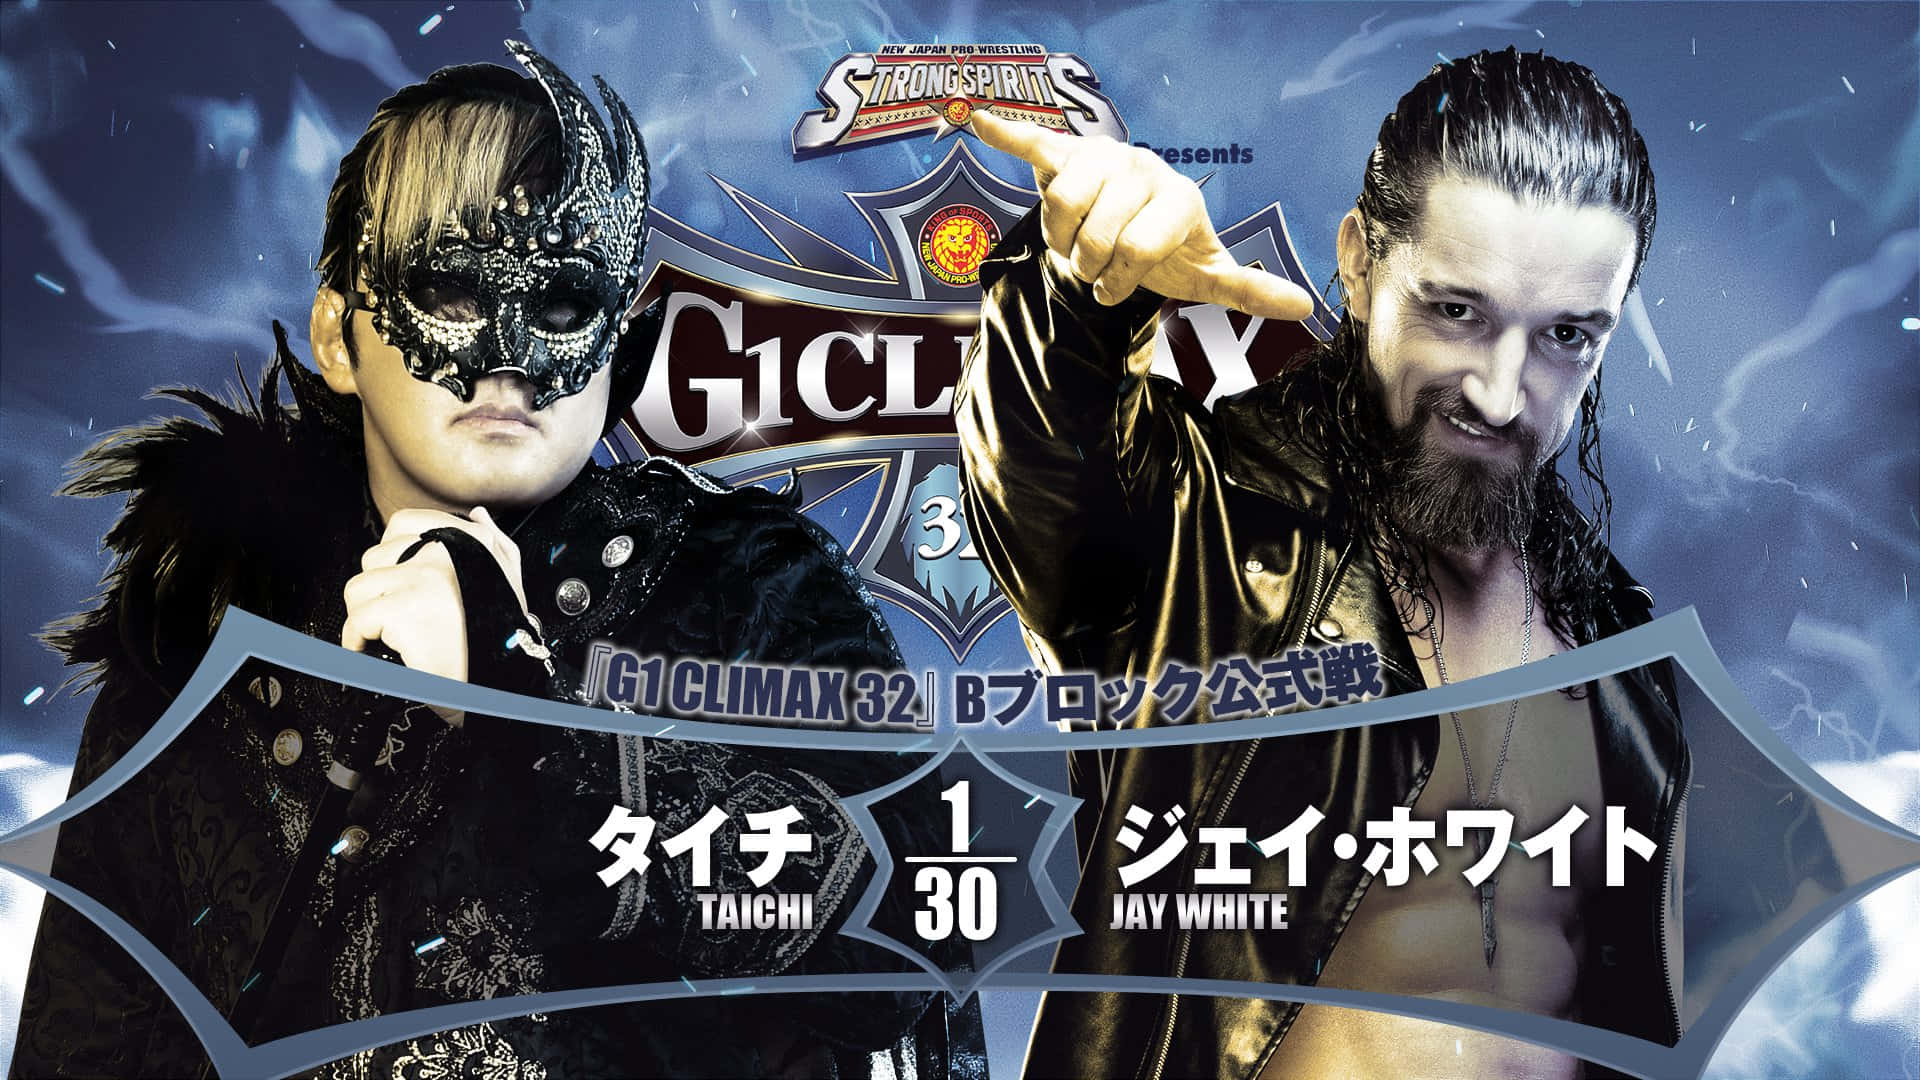 Jay White And Taichi NJPW G1 Climax 32 Wallpaper